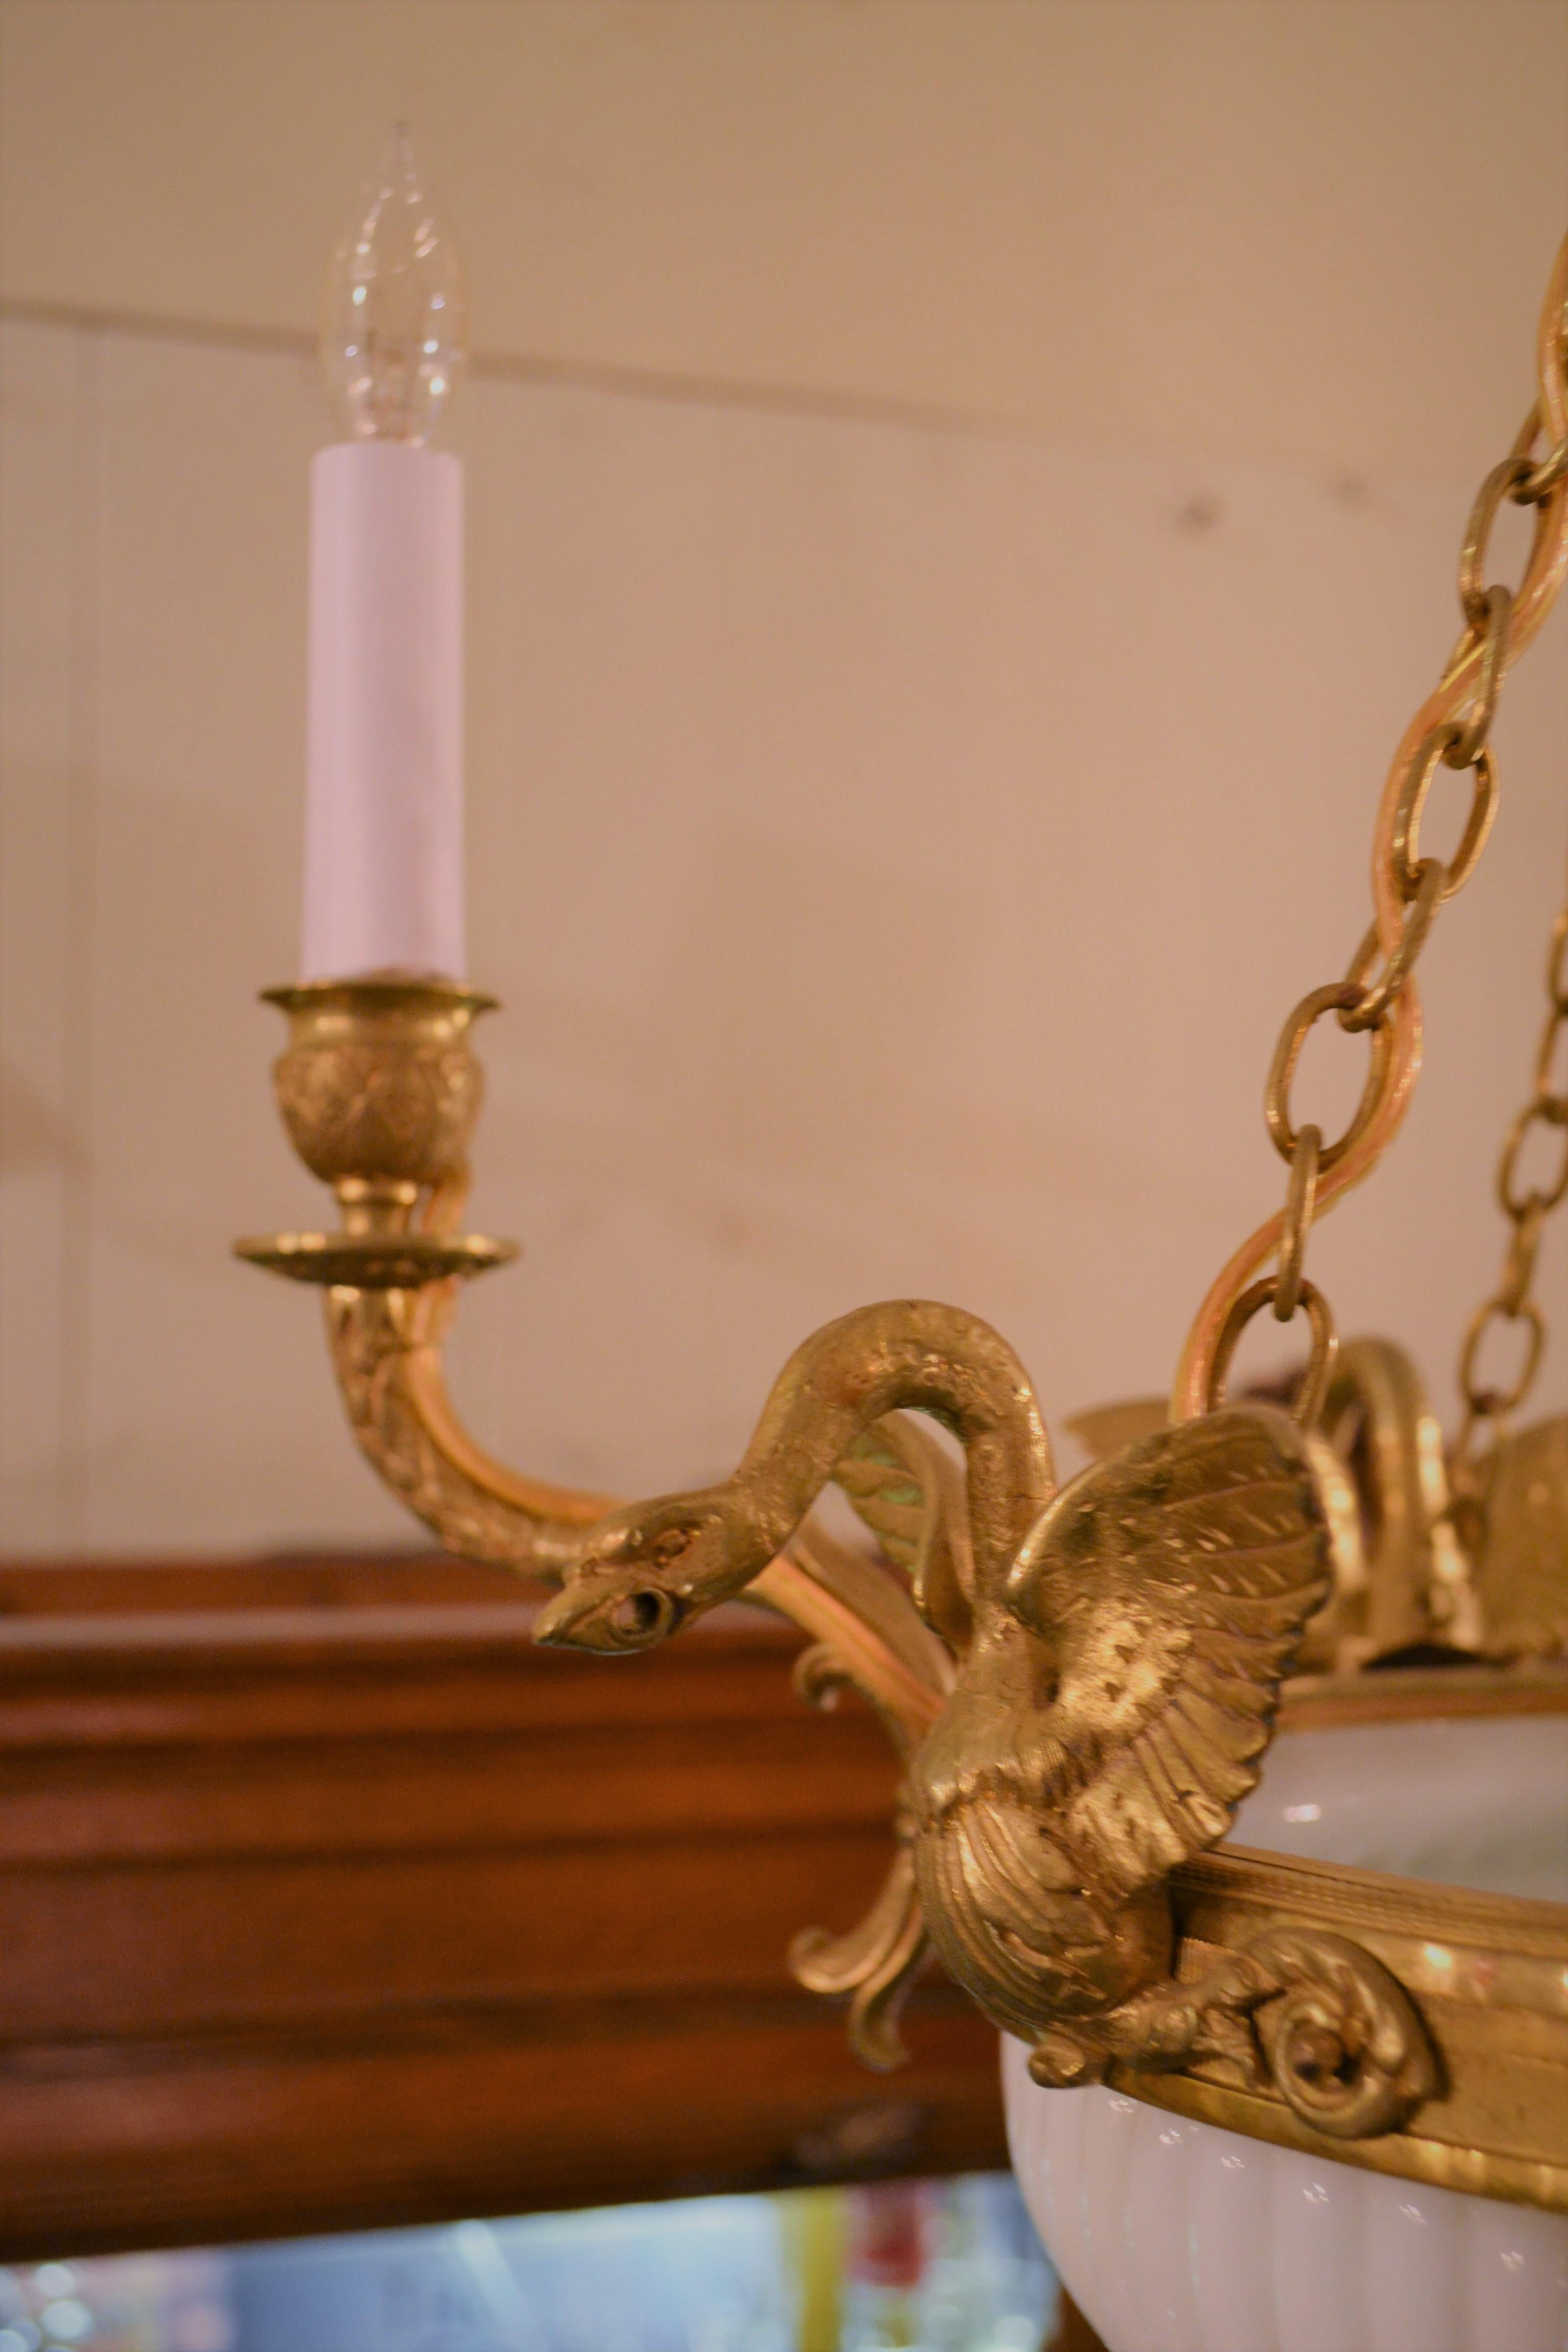 The ormolu swans lend a special grace to this milk glass Empire style fixture. It is medium-sized and would work well in many settings. 